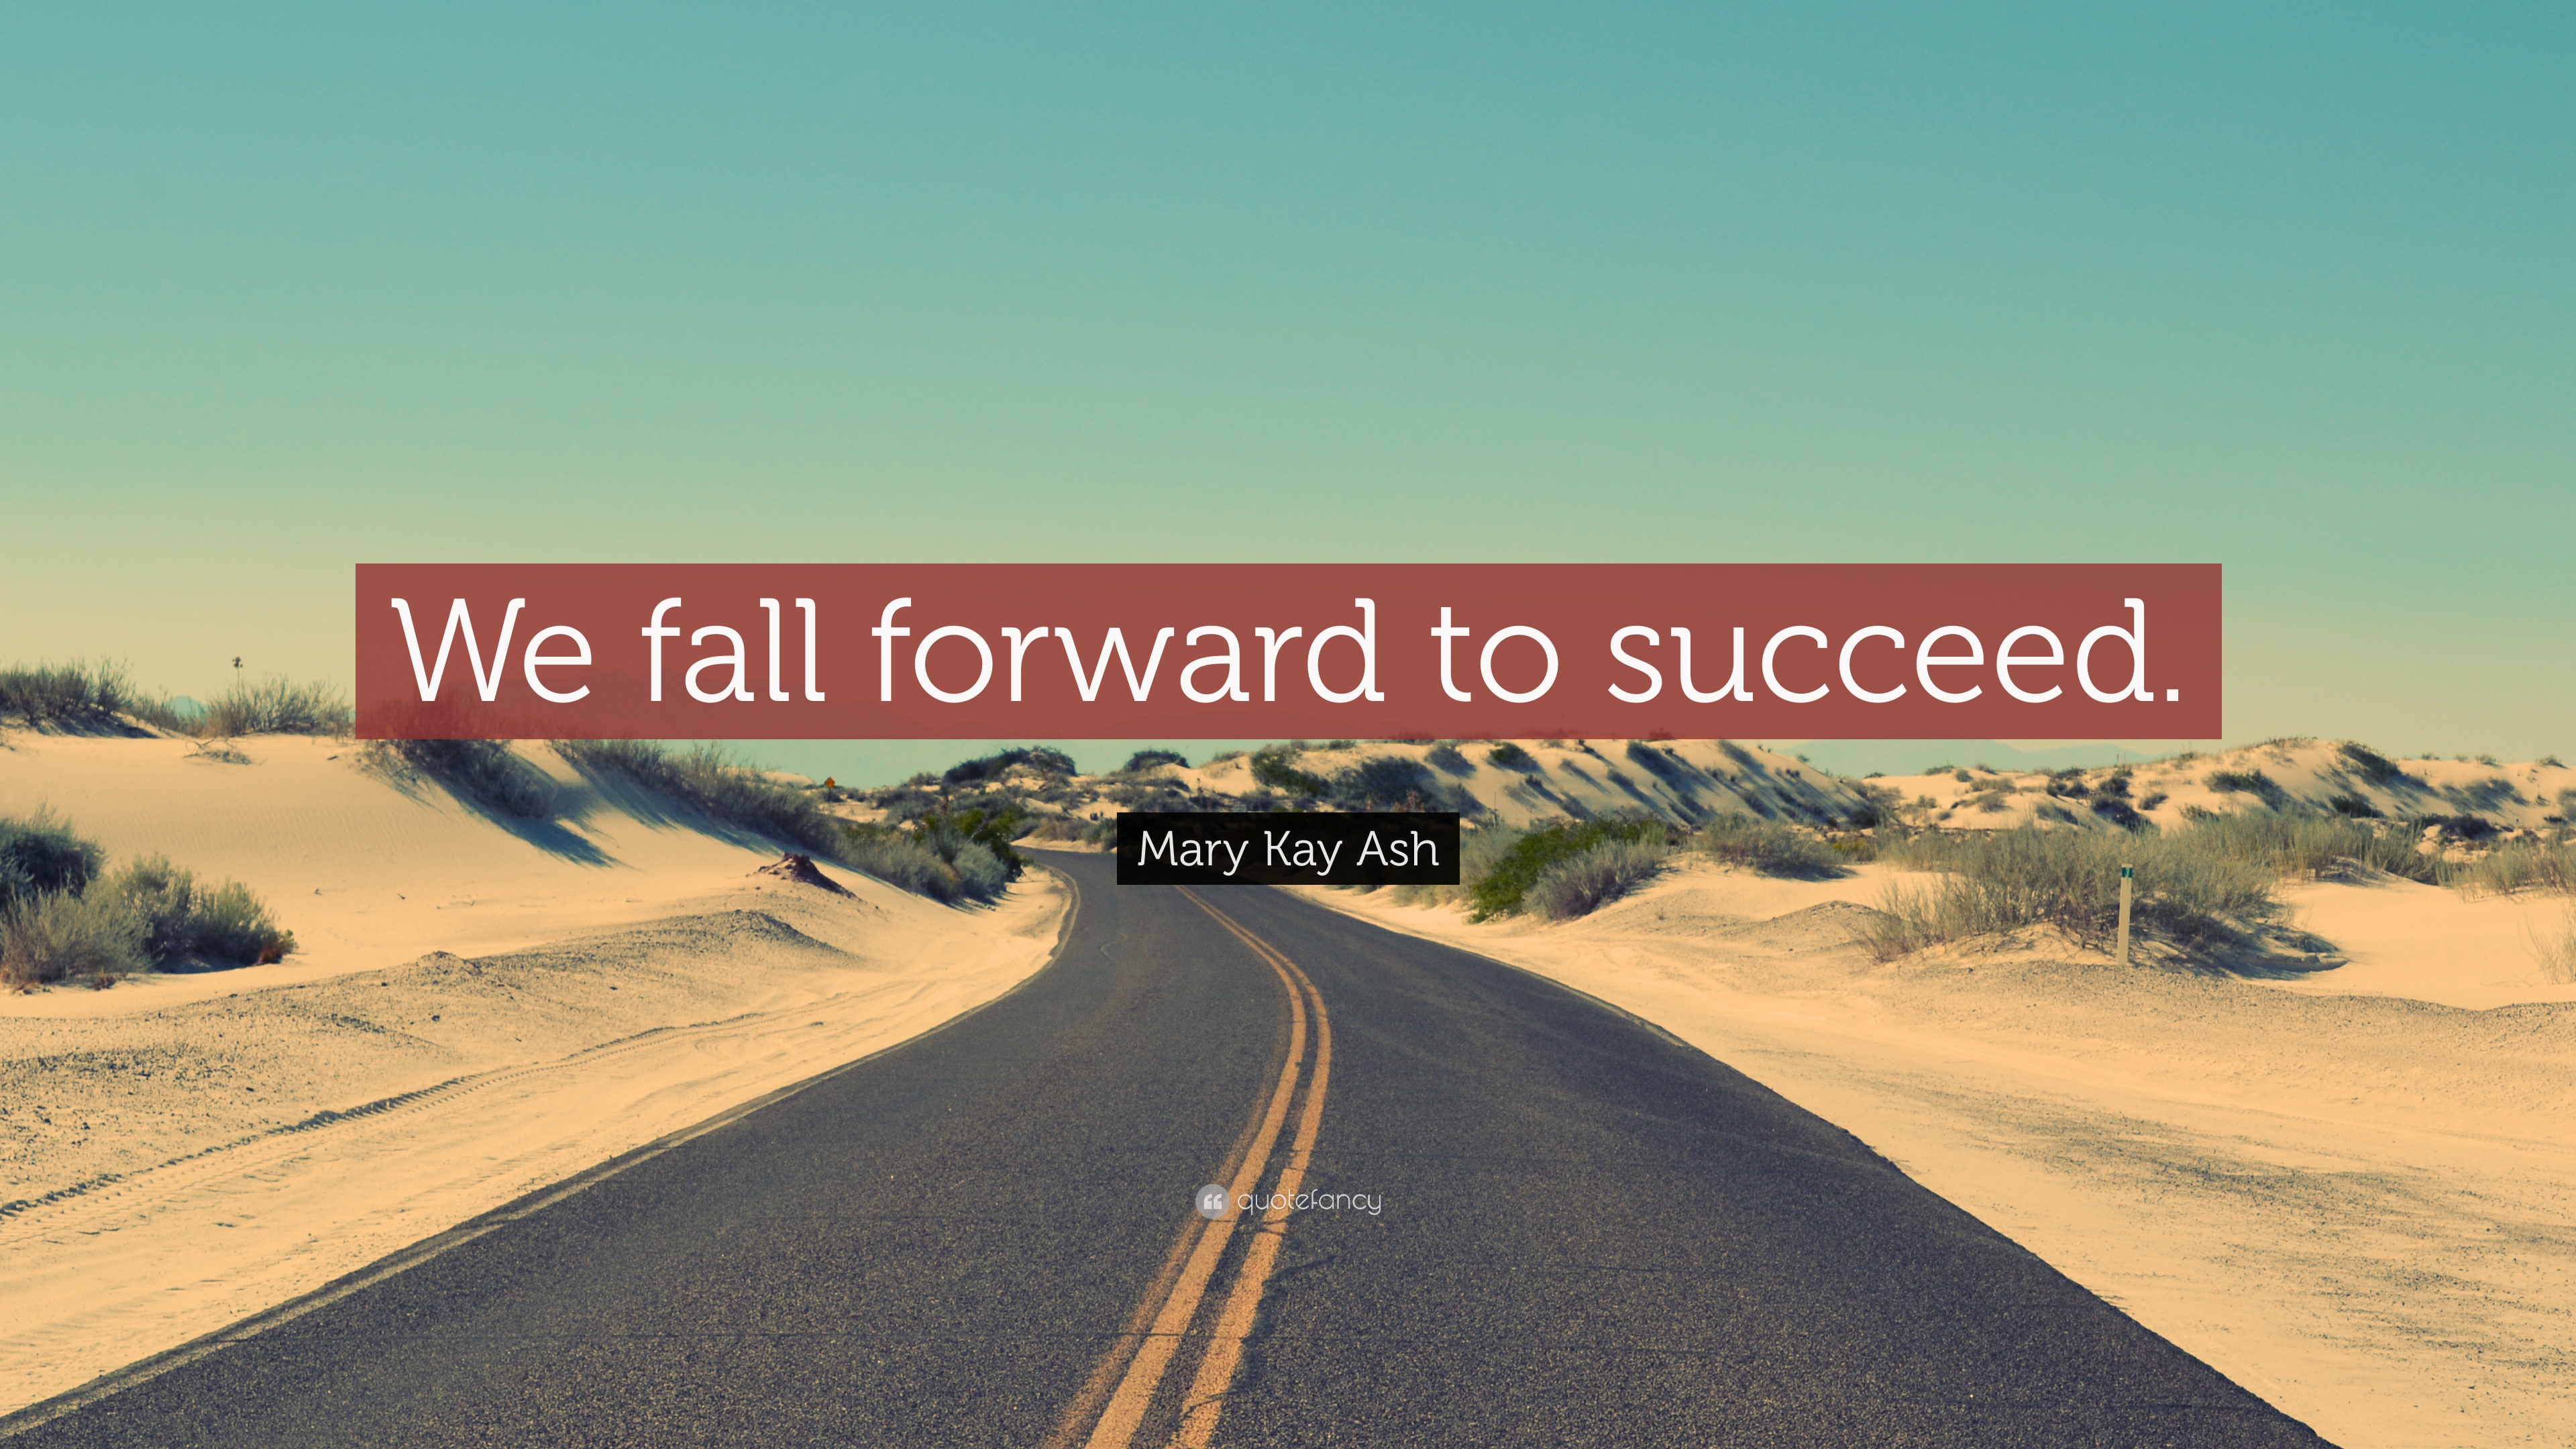 Mary Kay Ash Quote: “We fall forward to succeed.” 8 wallpaper